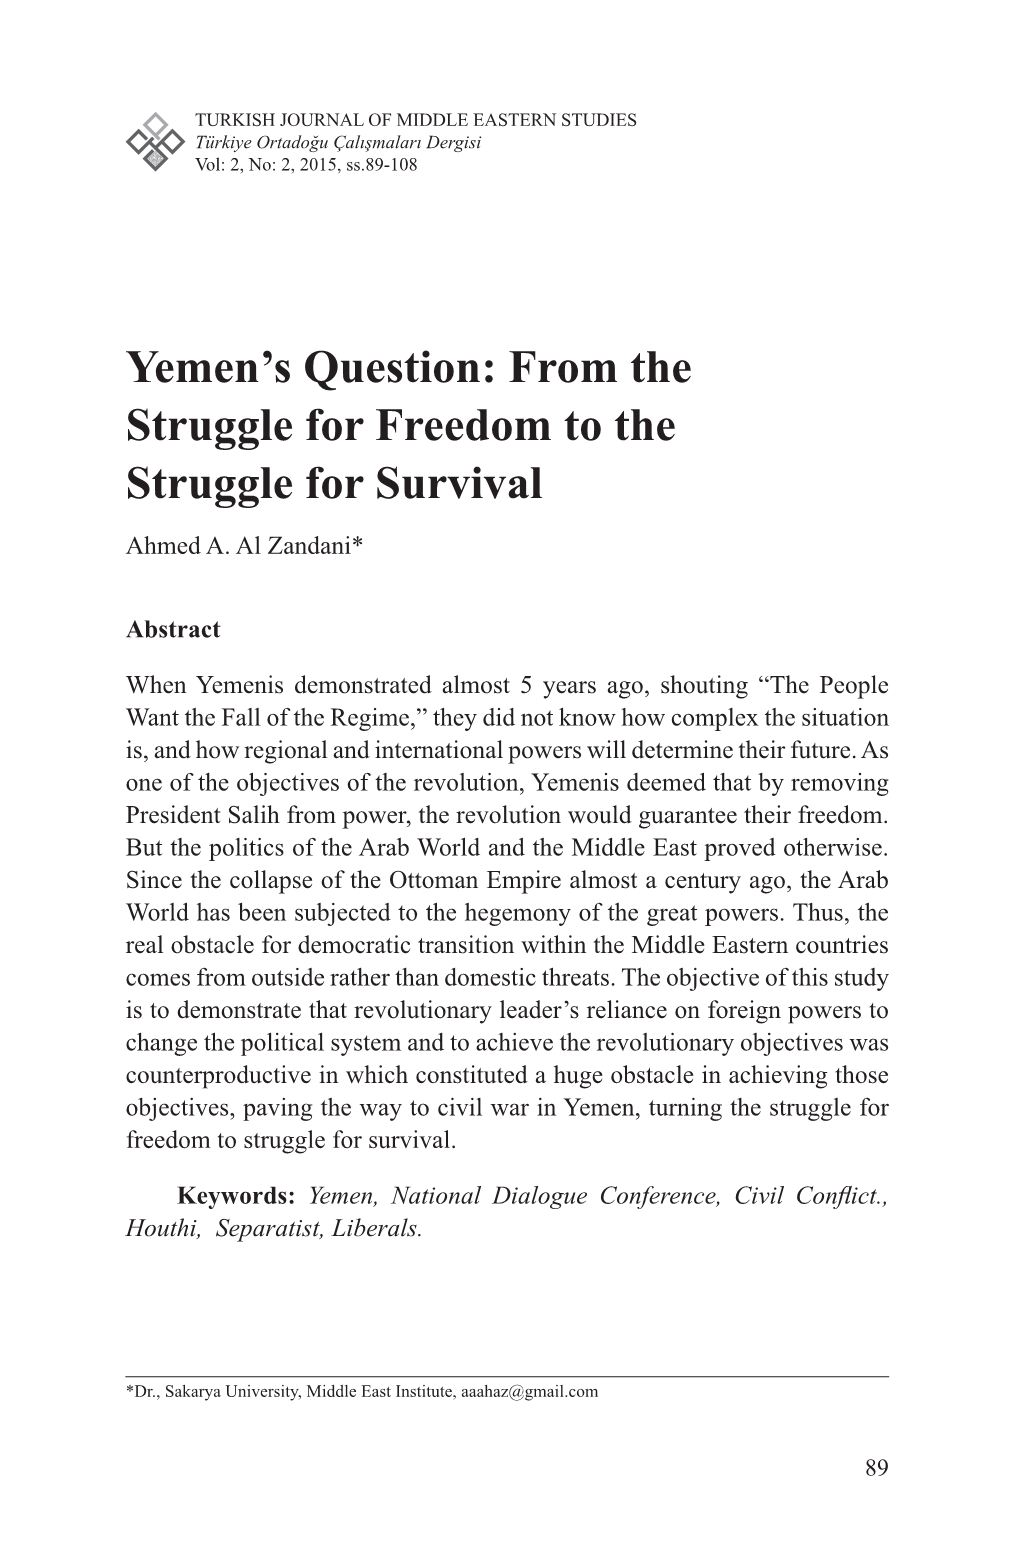 Yemen's Question: from the Struggle for Freedom to the Struggle for Survival